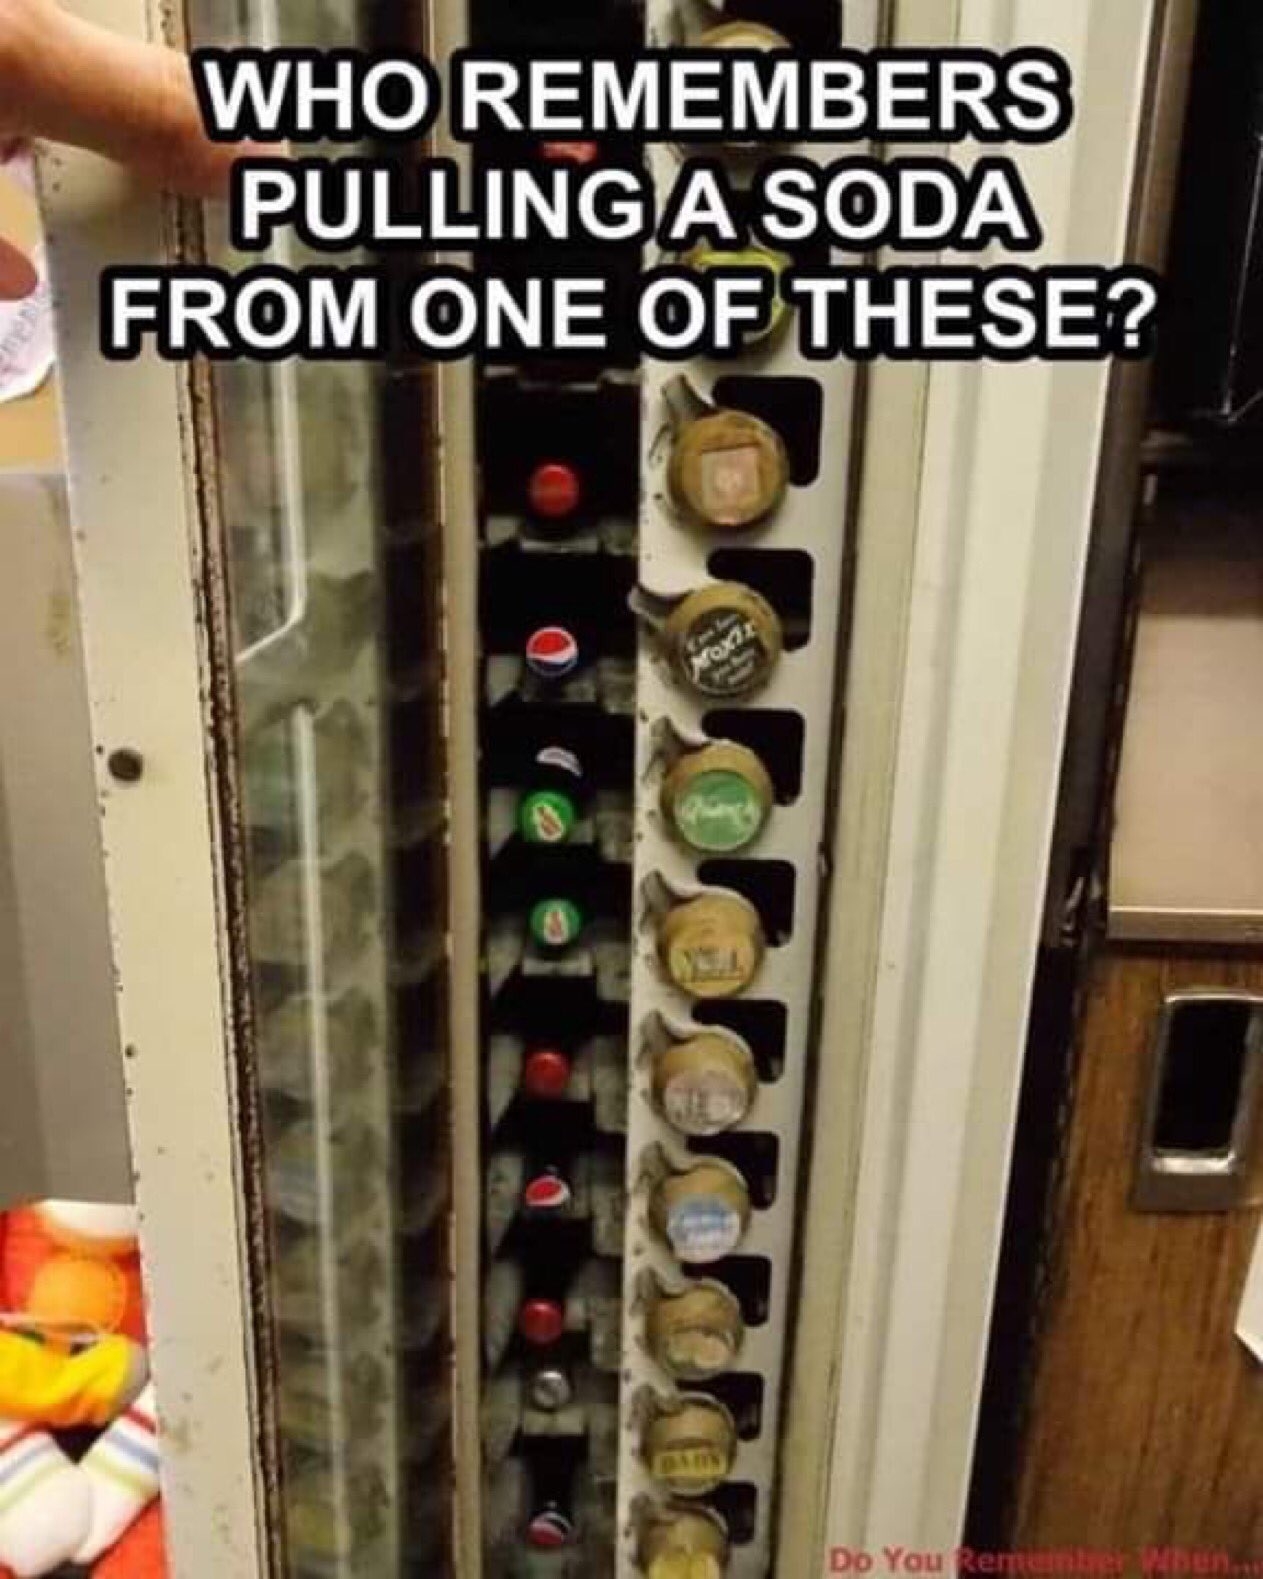 An old-school soda machine with cans in individual slots